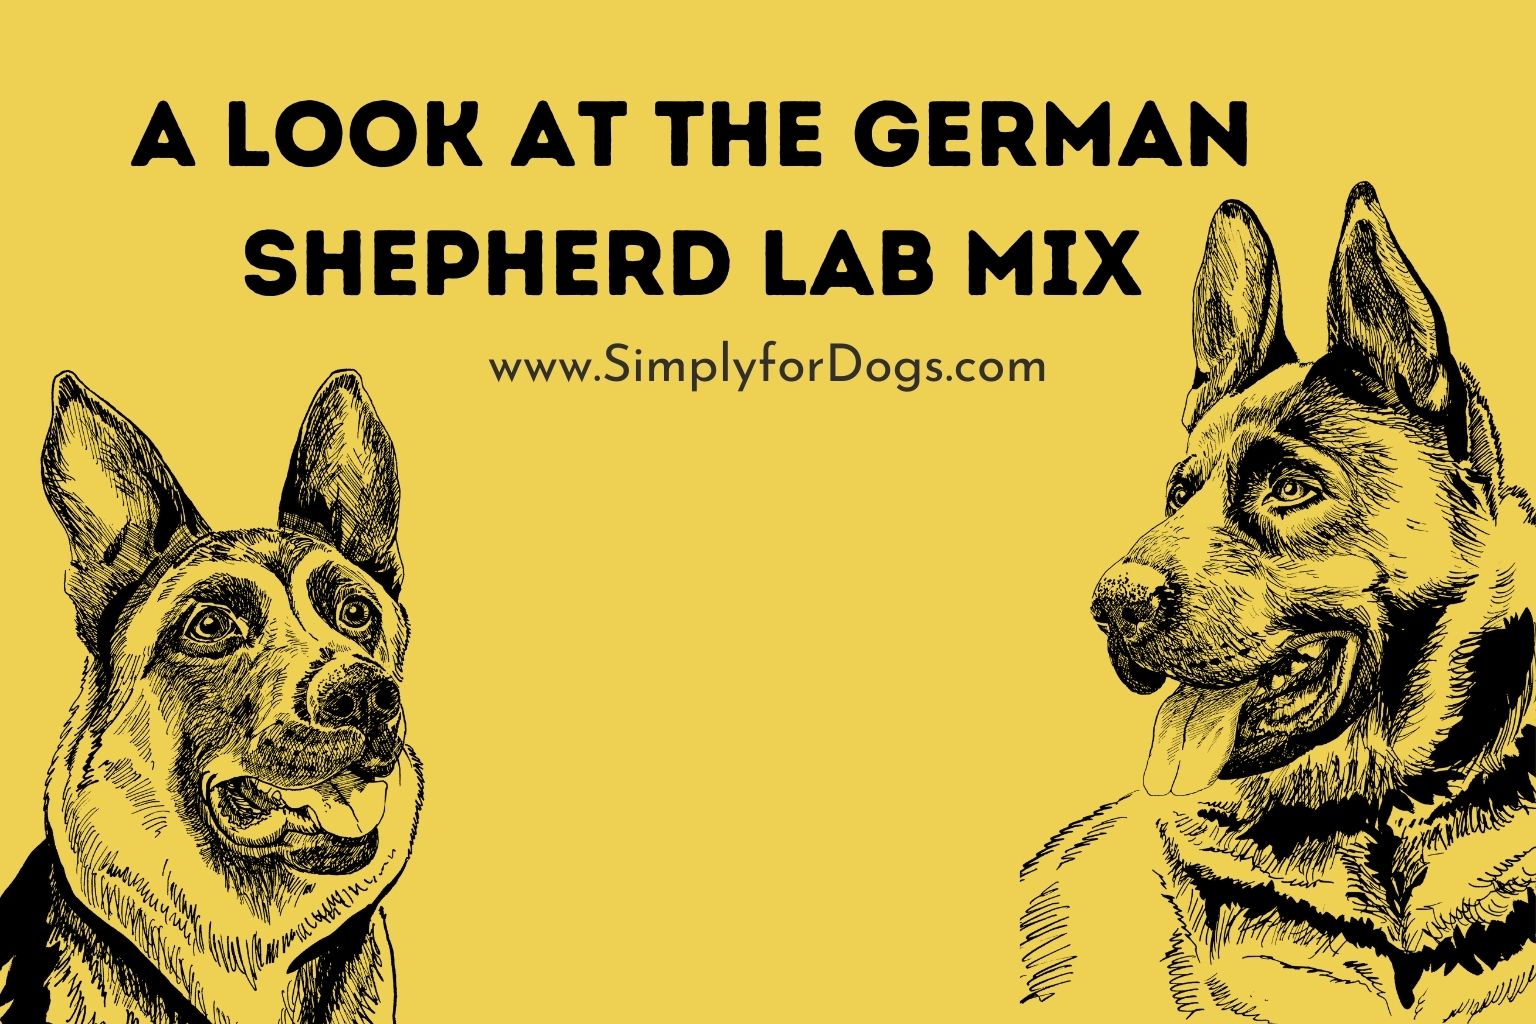 A Look at the German Shepherd Lab Mix